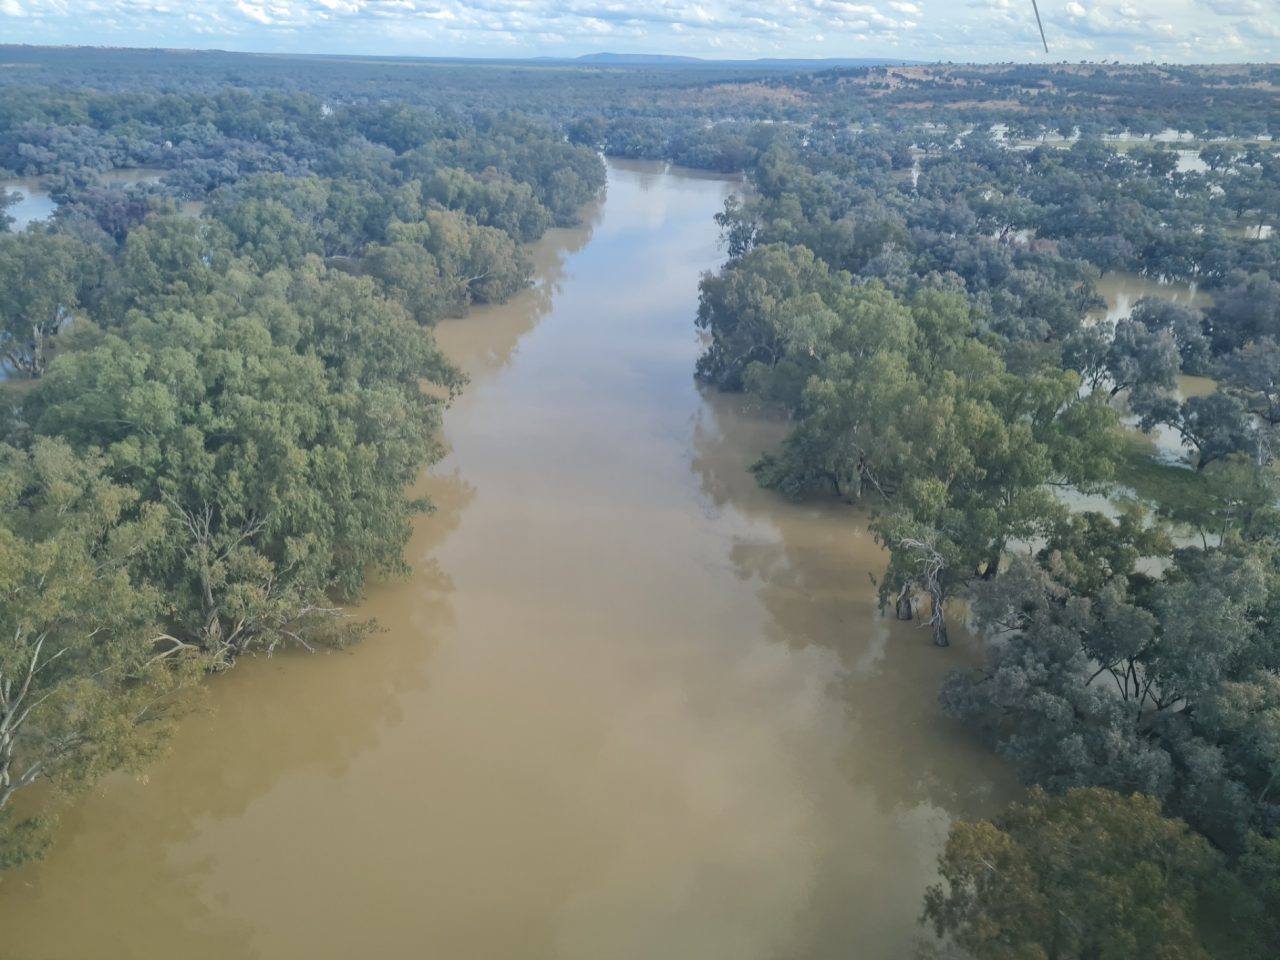 Aerial photo of flooded river with water running over the tree lined banks and onto the floodplain